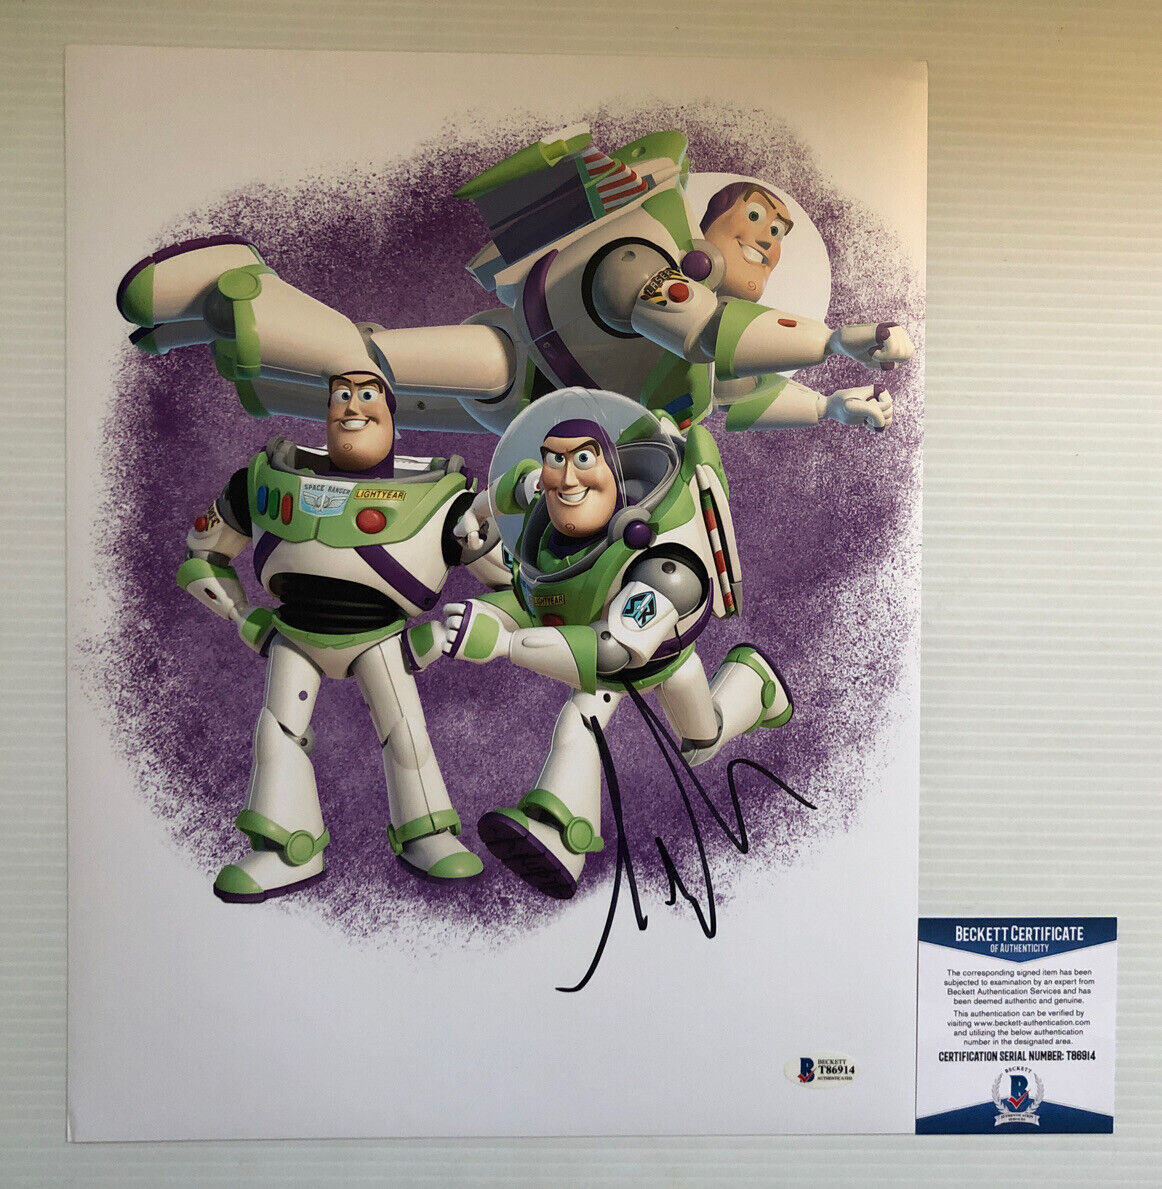 Tim Allen Signed Autographed 11x14 Photo Poster painting Toy Story Pixar Buzz Beckett COA 4